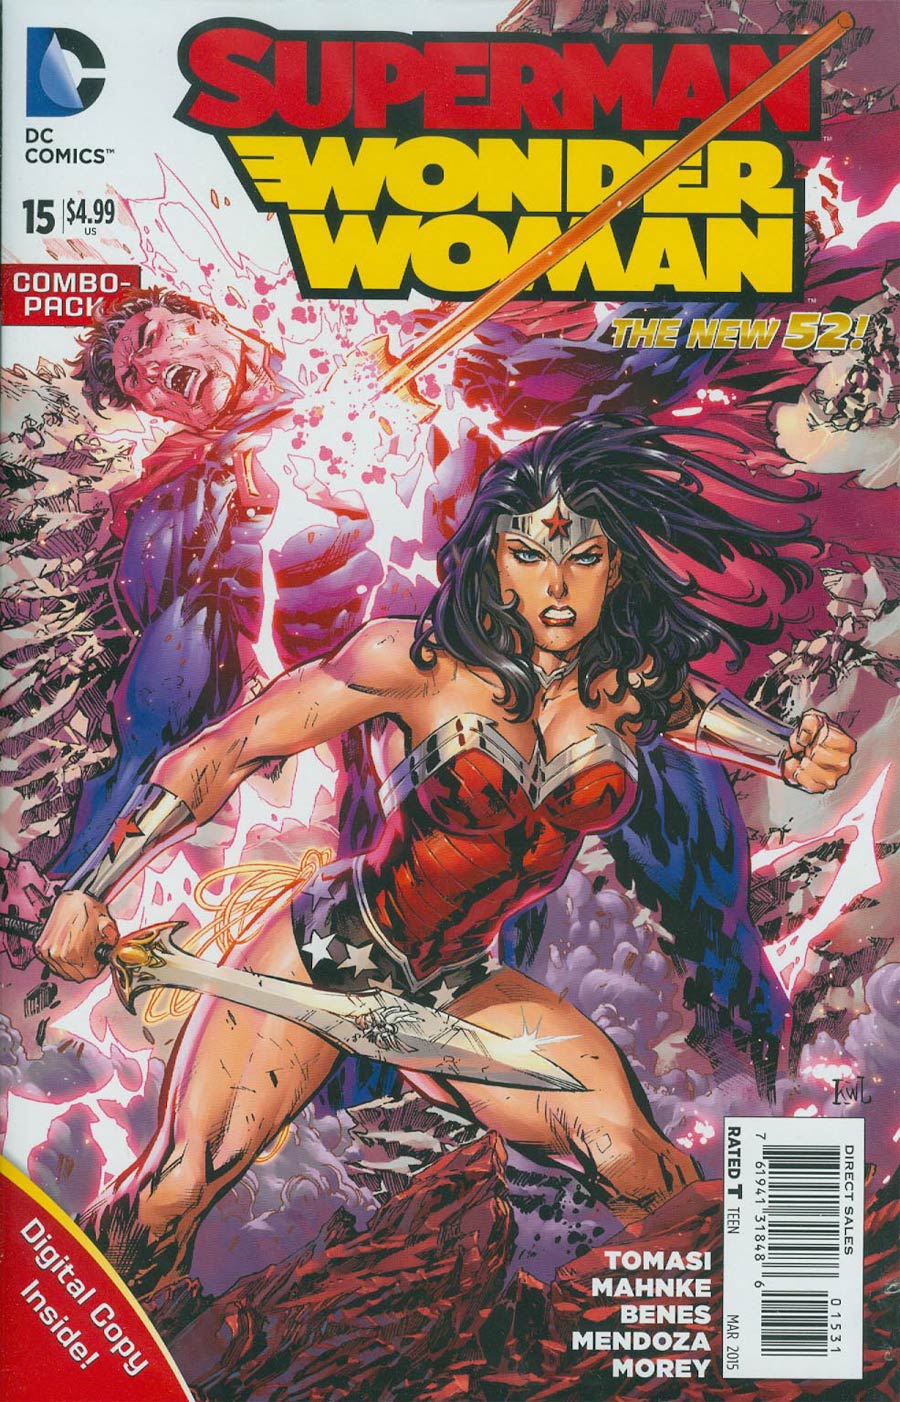 Superman Wonder Woman #15 Cover D Combo Pack Without Polybag